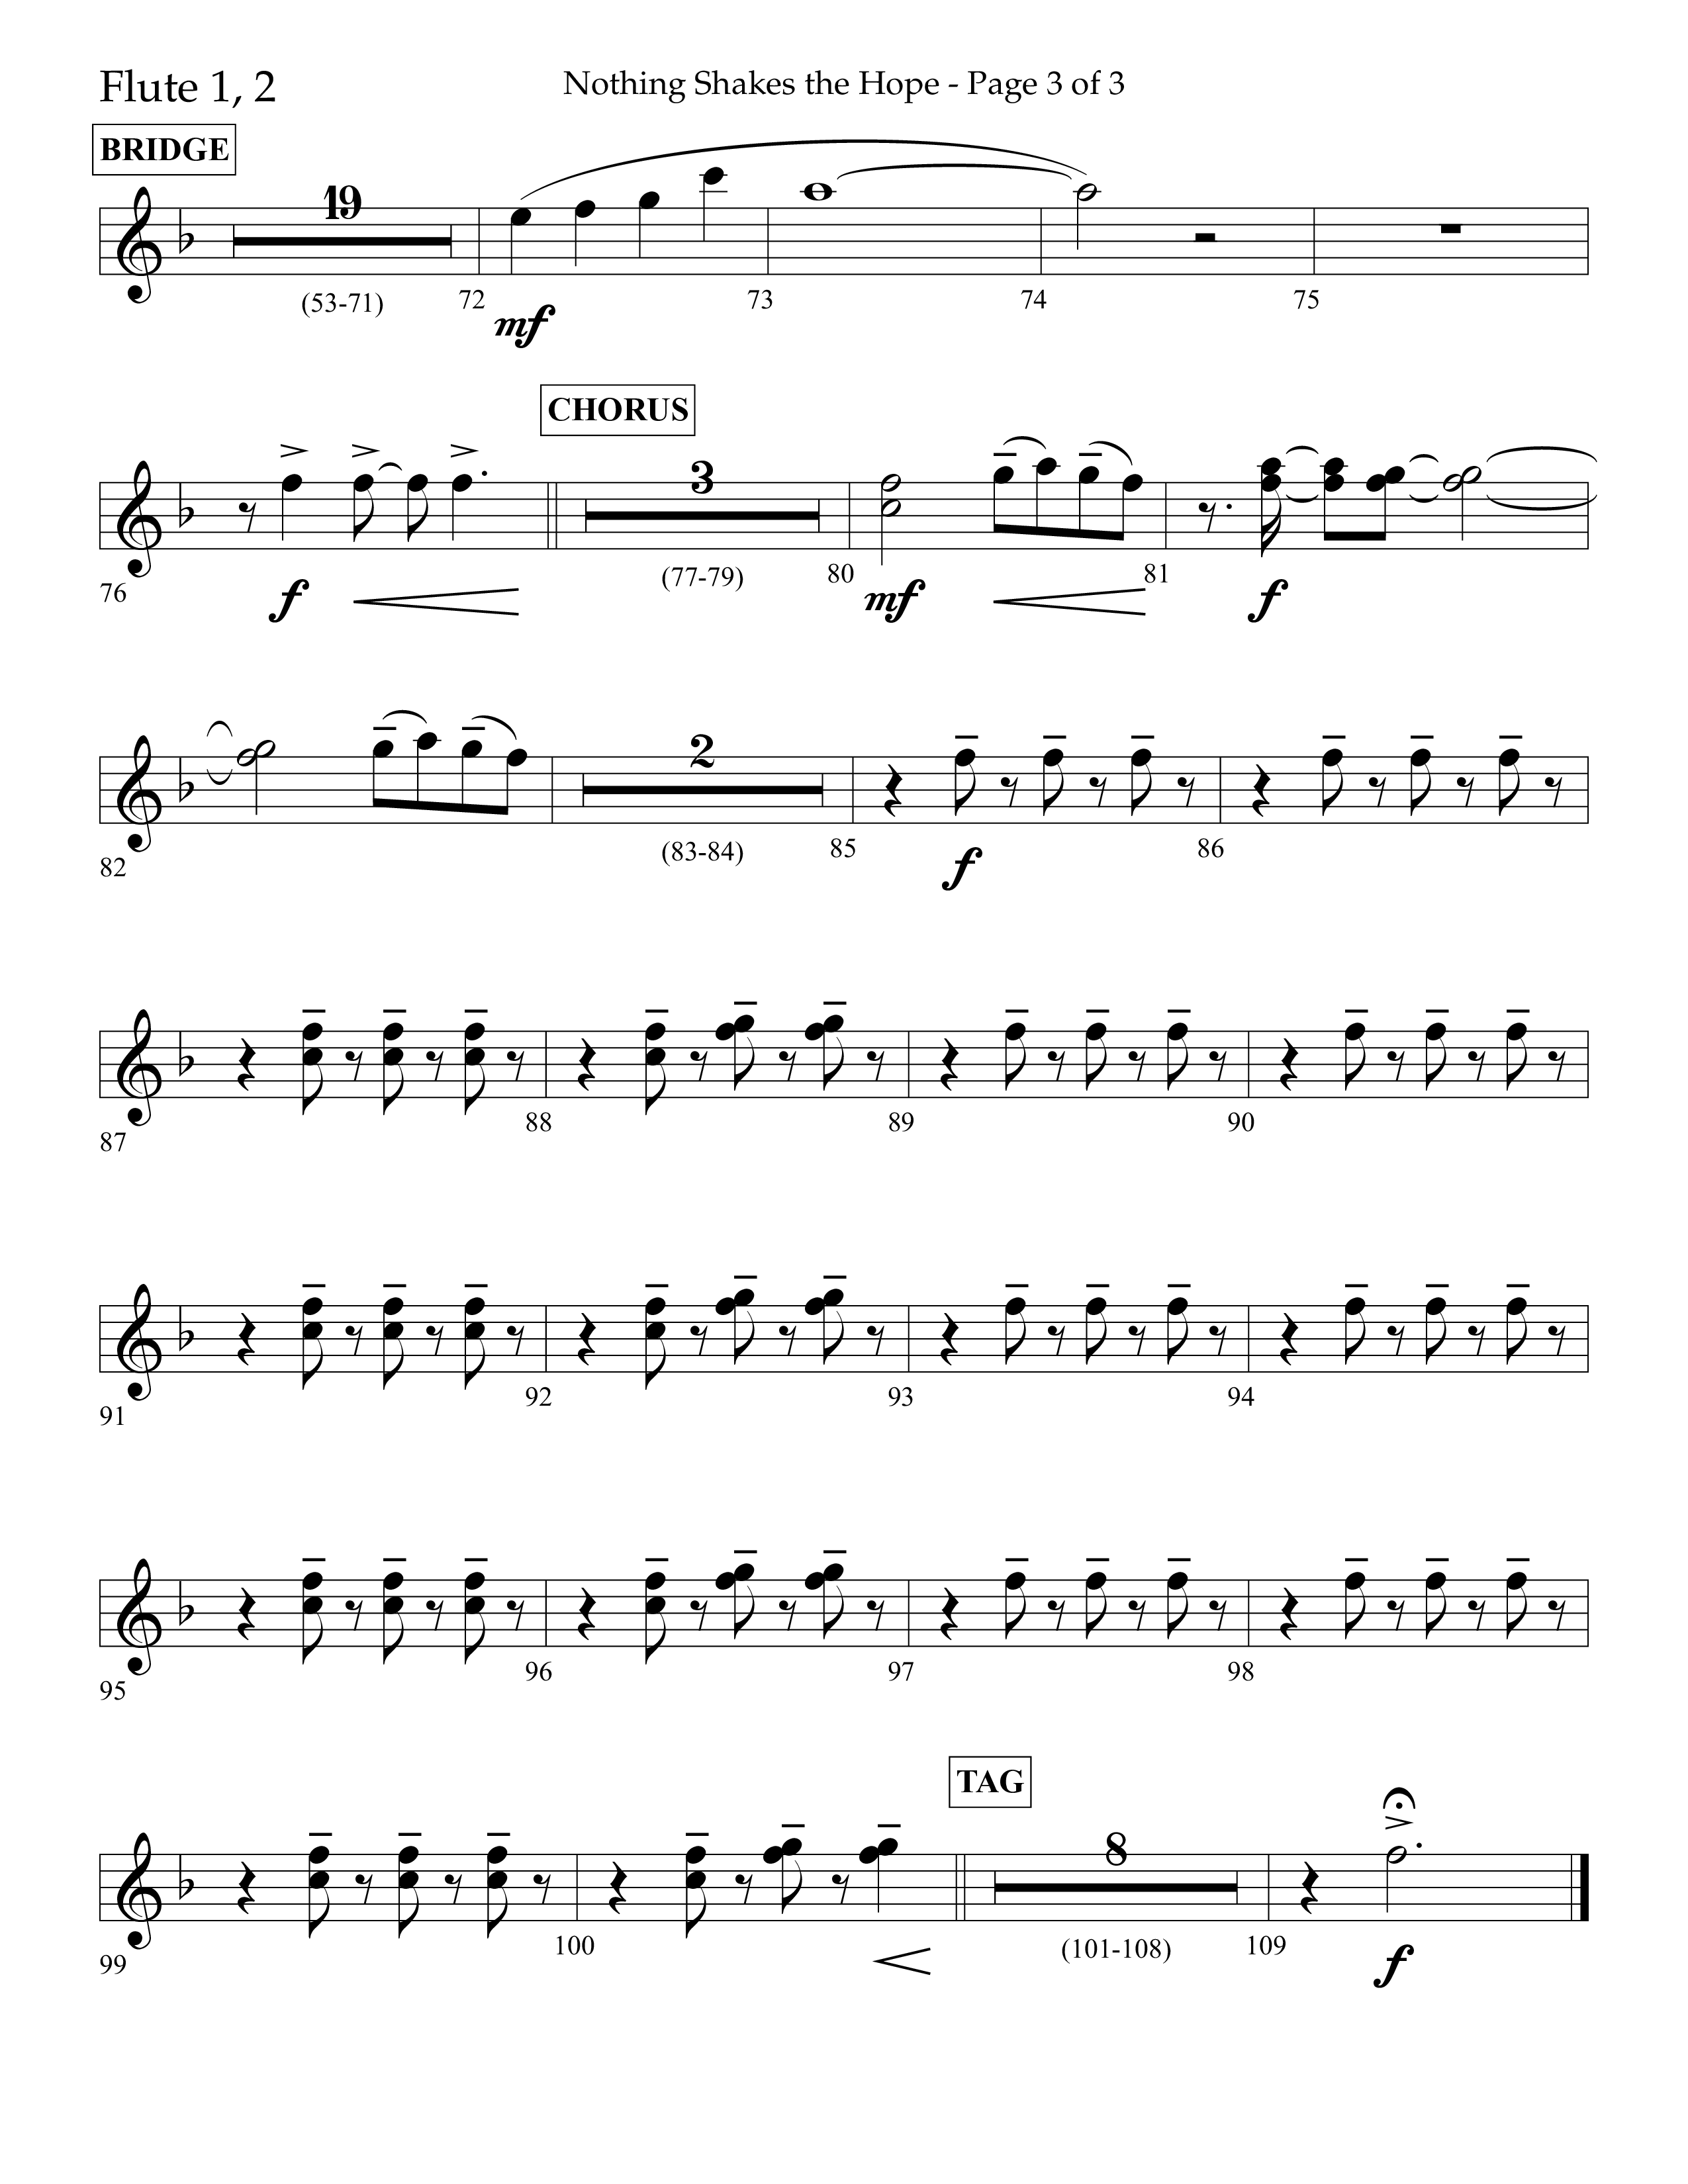 Nothing Shakes The Hope (Choral Anthem SATB) Flute 1/2 (Lifeway Choral / Arr. John Bolin / Arr. Don Koch / Orch. Cliff Duren)